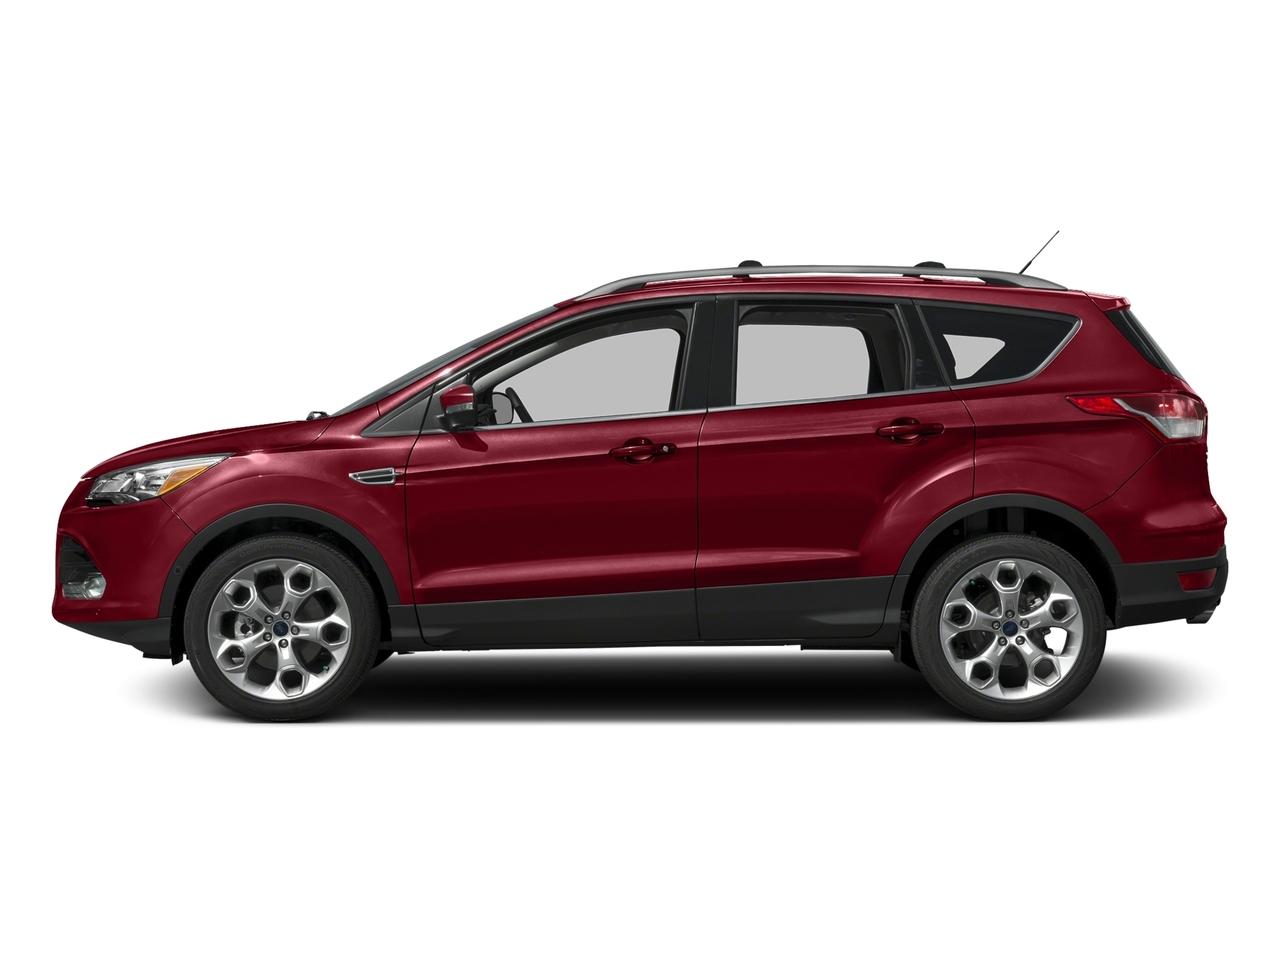 Used 2016 Ford Escape Titanium with VIN 1FMCU9J97GUA11448 for sale in Kenyon, Minnesota